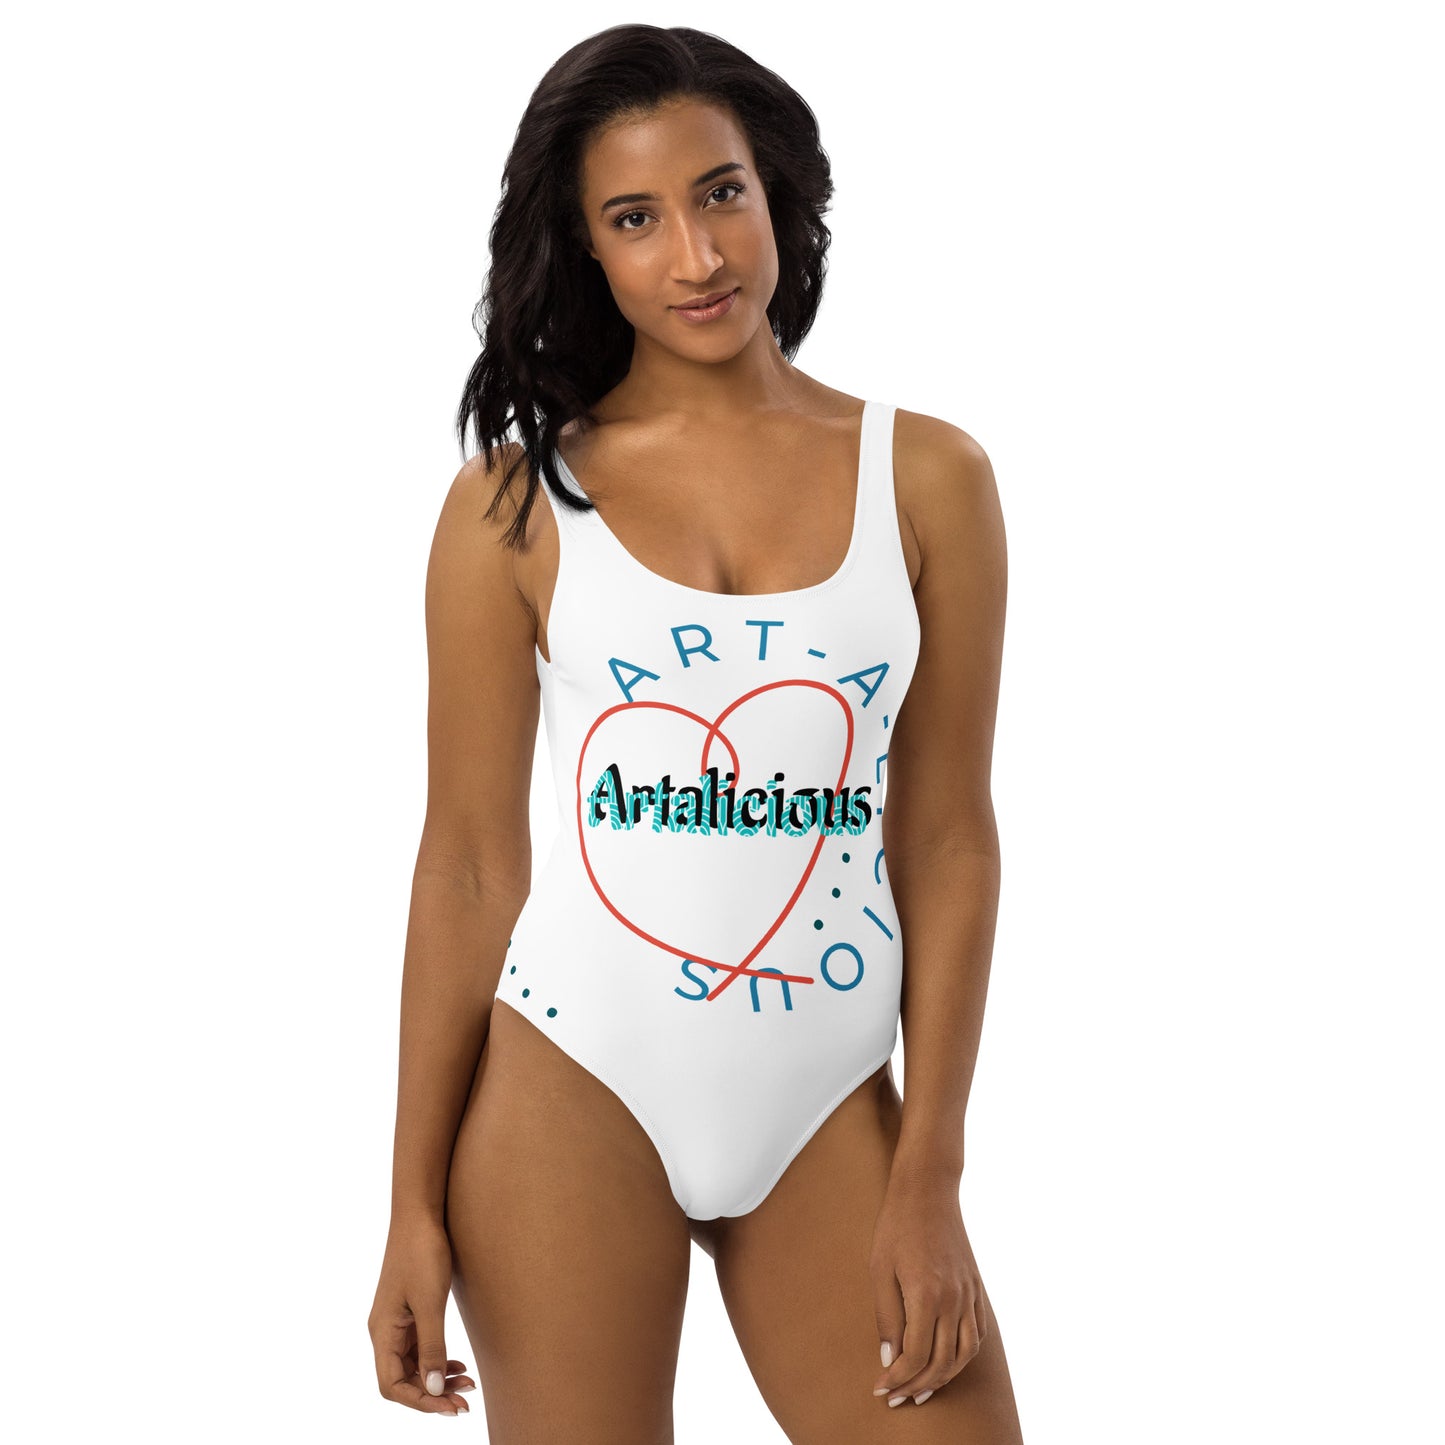 *New* Art-a-licious One-Piece Swimsuit